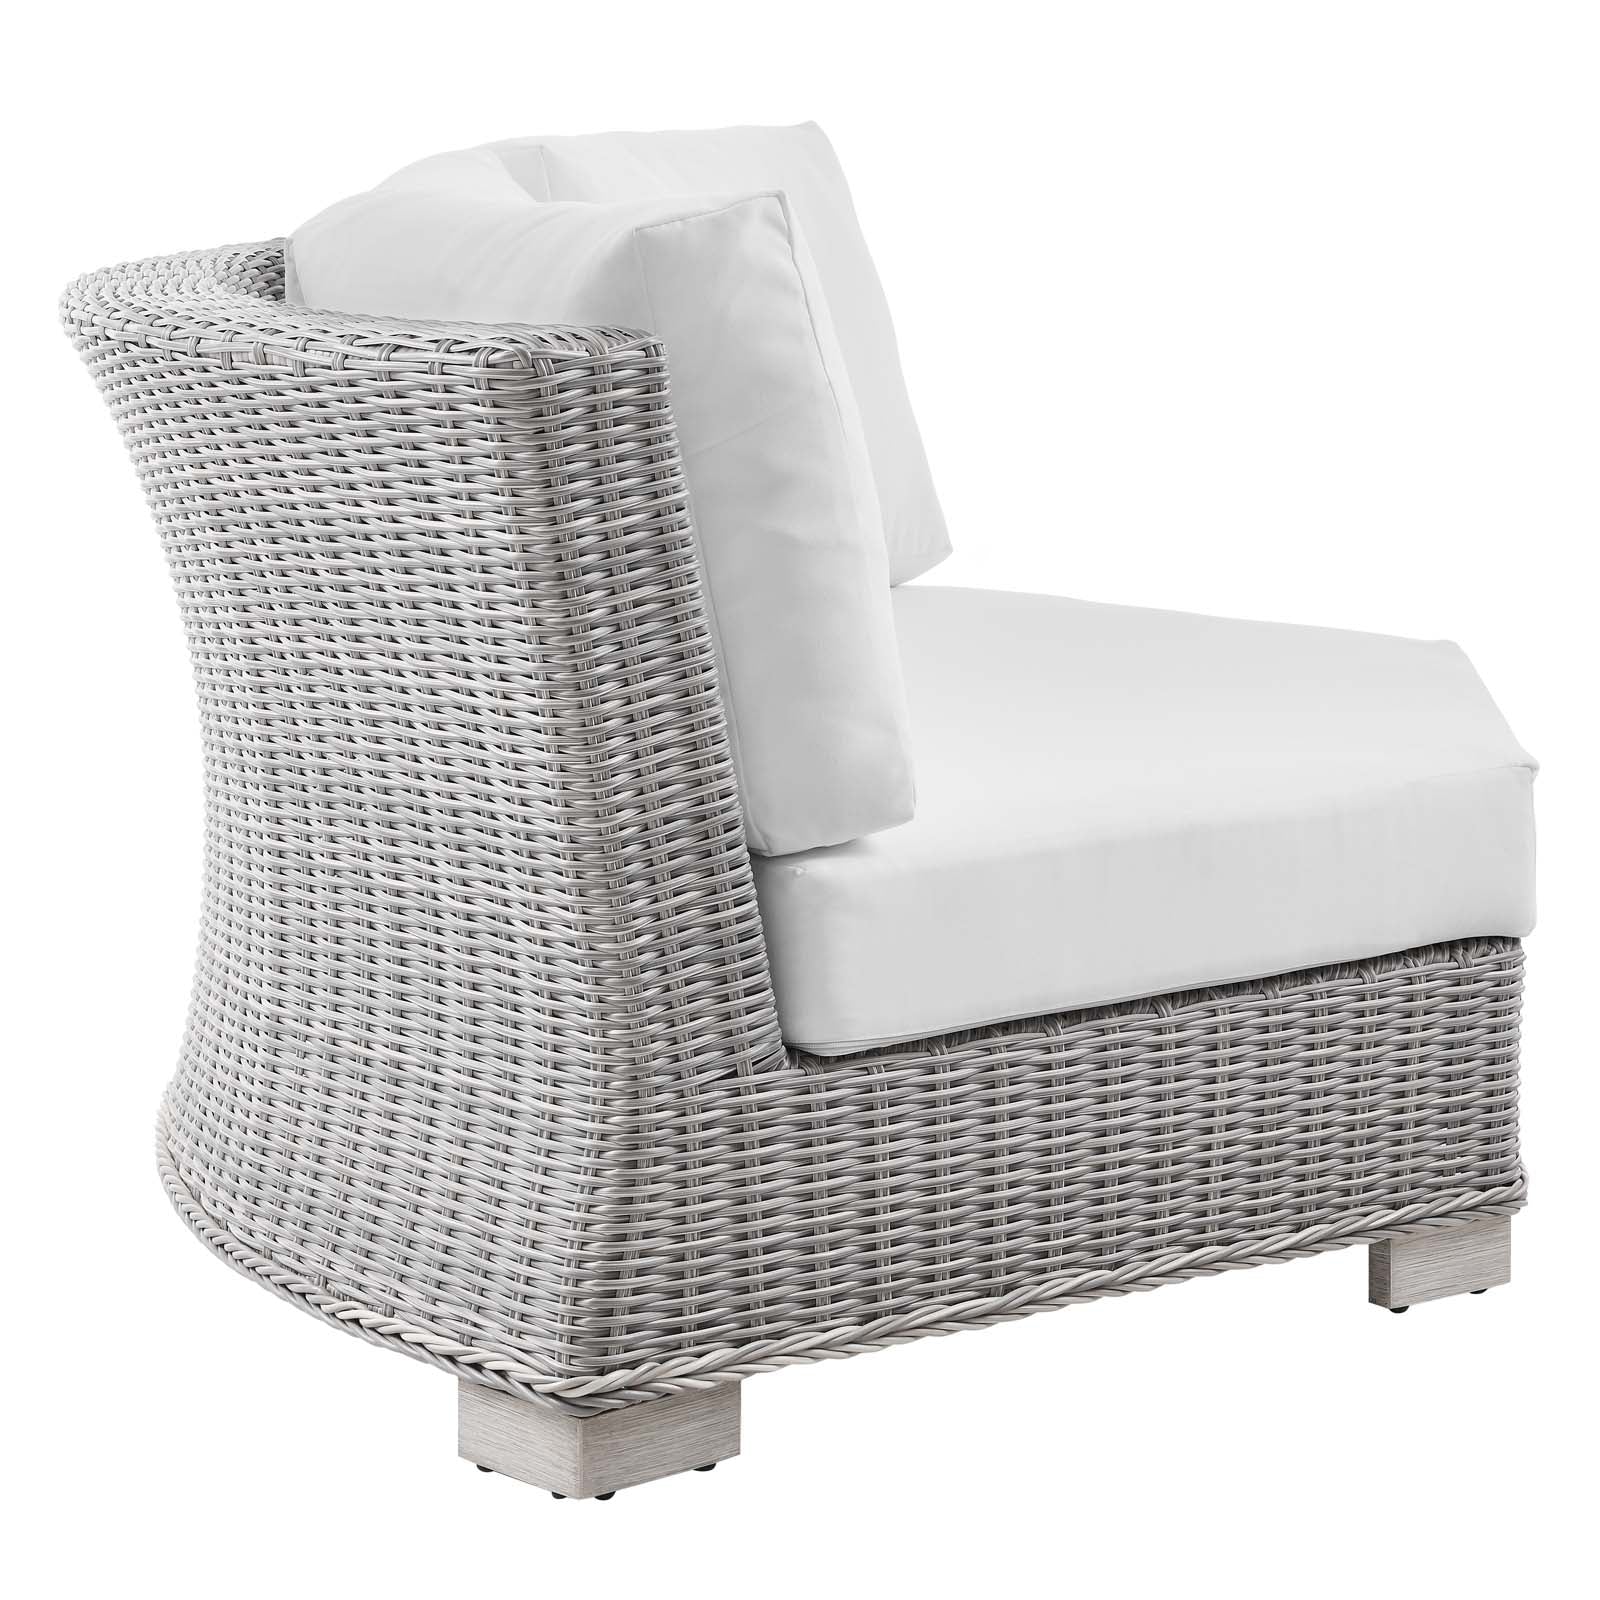 Modway Outdoor Chairs - Conway Outdoor Patio Wicker Rattan Round Corner Chair Light Gray White